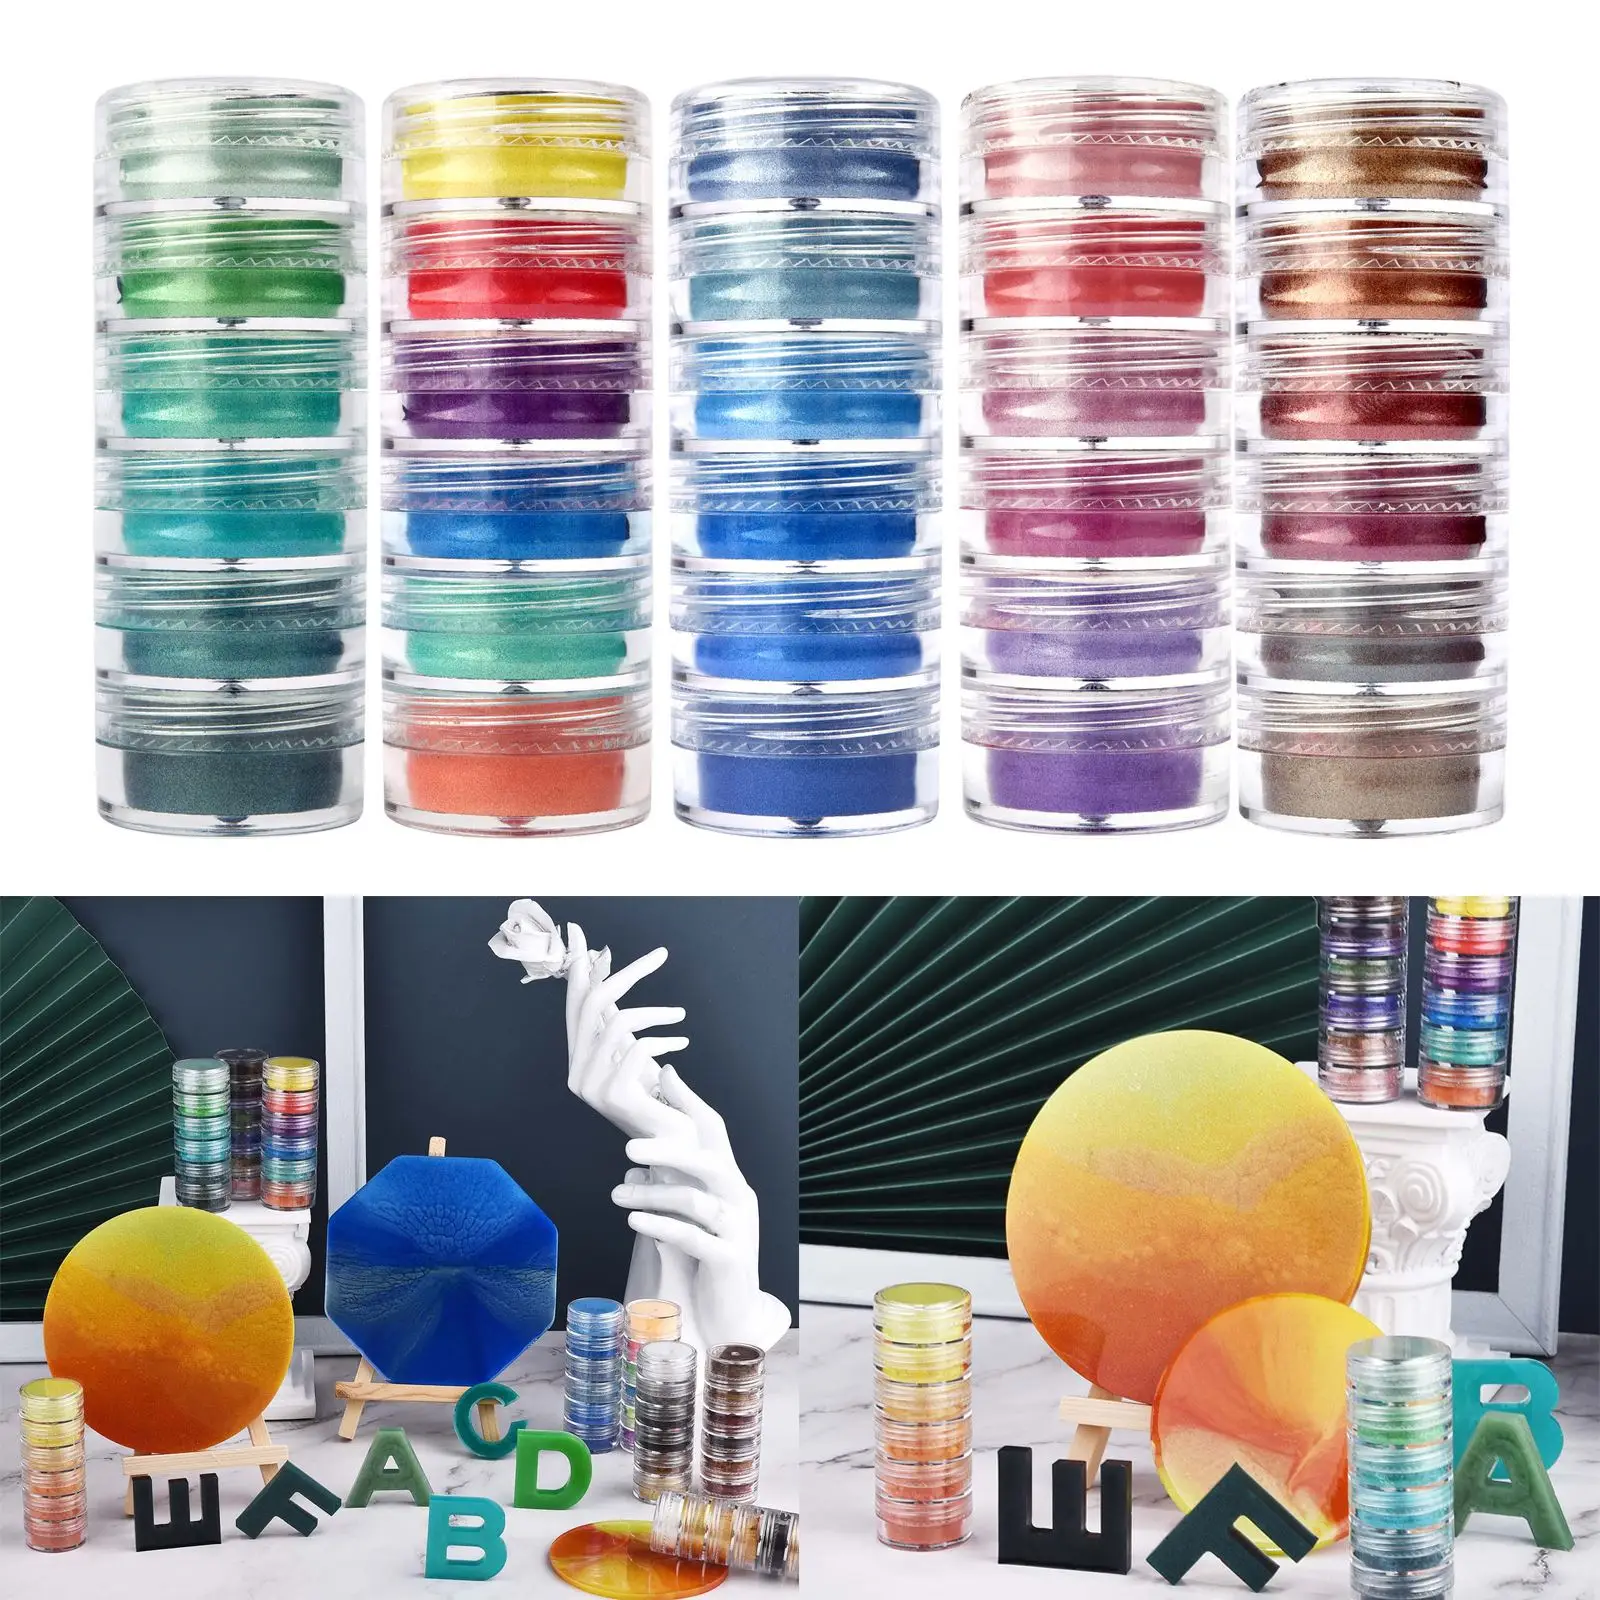 6Colors/Set Pearl Pwder Pigments Pearlescent Epoxy Resin Pigments DIY Epoxy Resin Candle Mold Soap Colorant Dye Making Craft